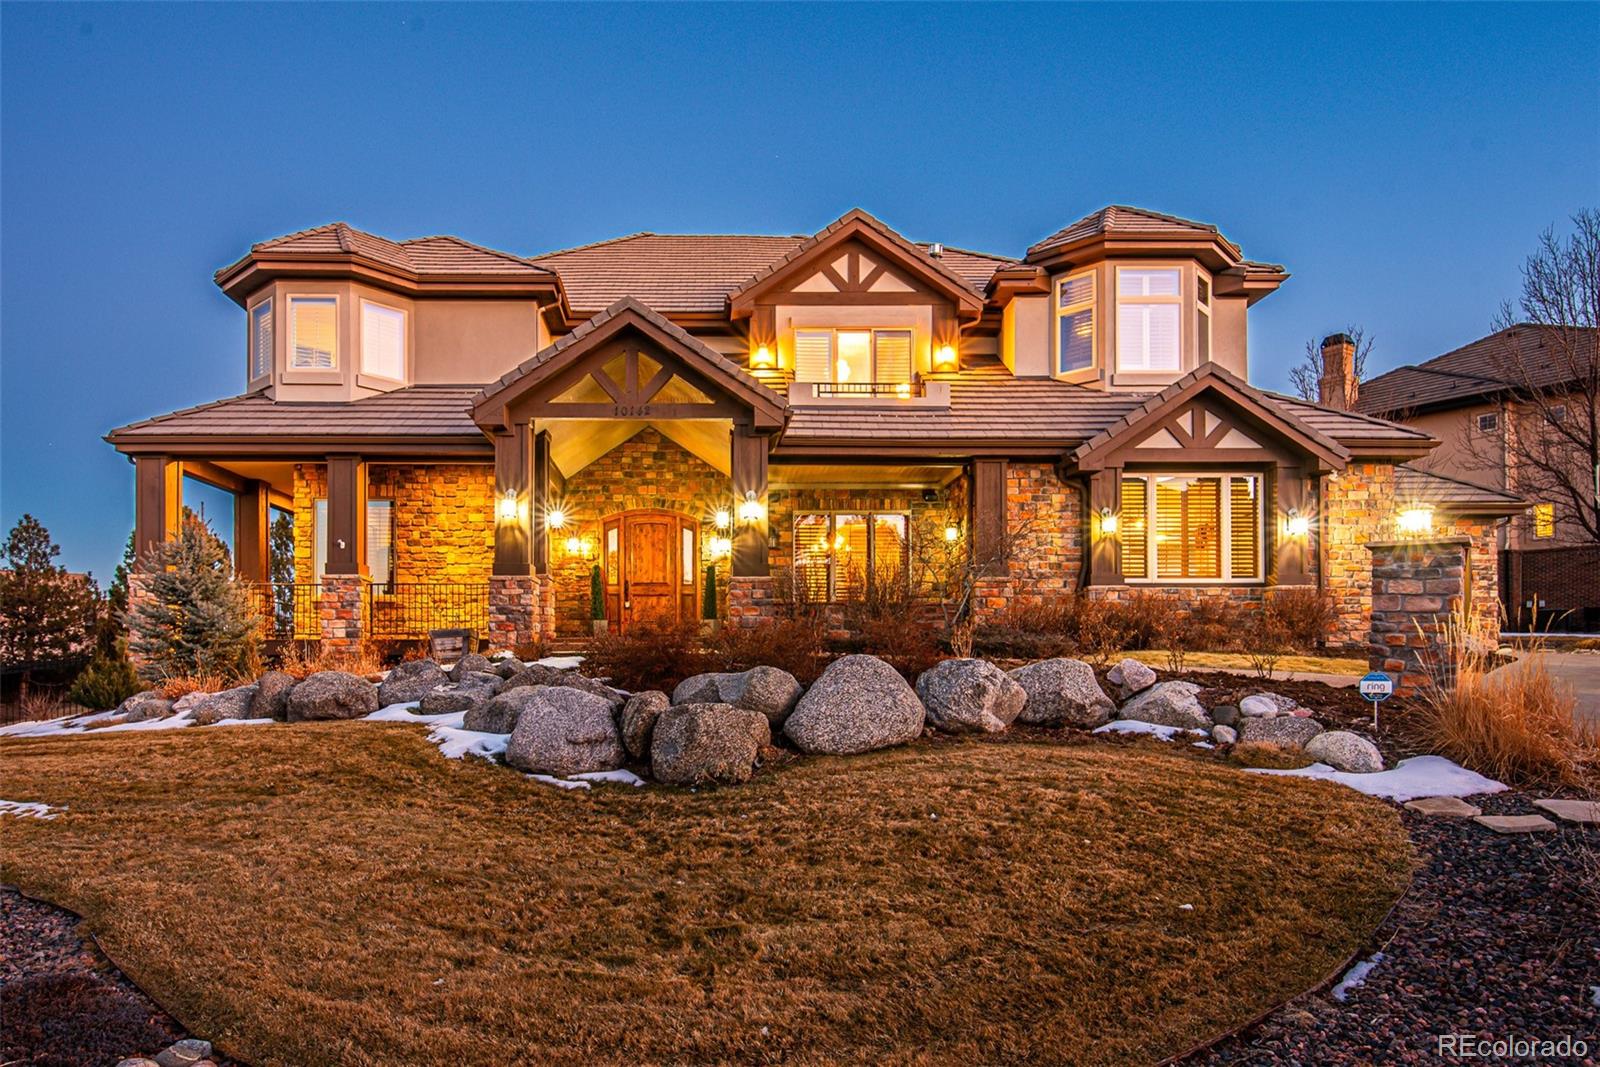 10142  Crooked Stick Trail, lone tree MLS: 2524534 Beds: 5 Baths: 7 Price: $2,250,000